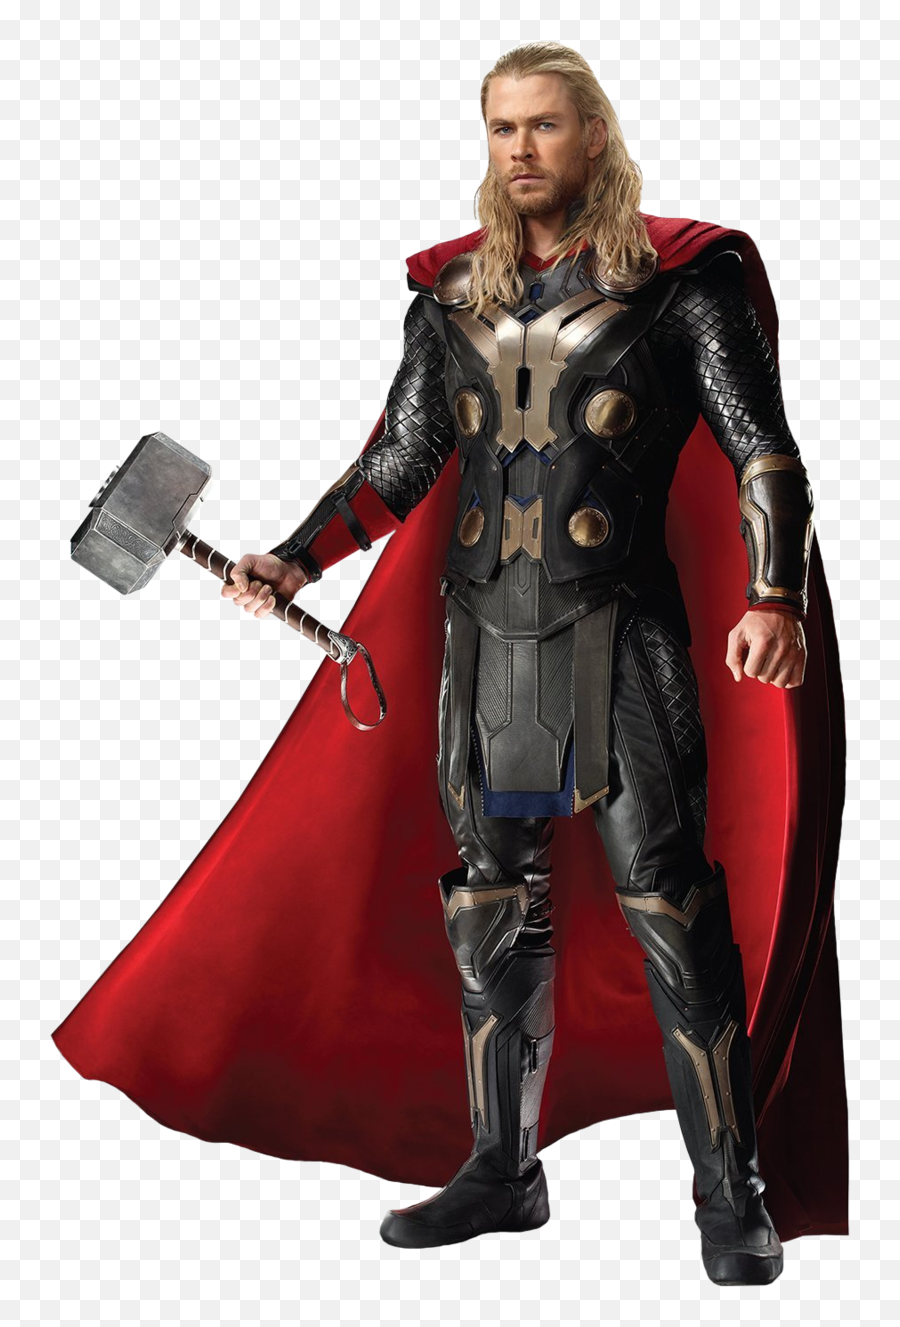 Download Thor Free Png Transparent Image And Clipart - Thor Transparent Background,Loki Transparent Background